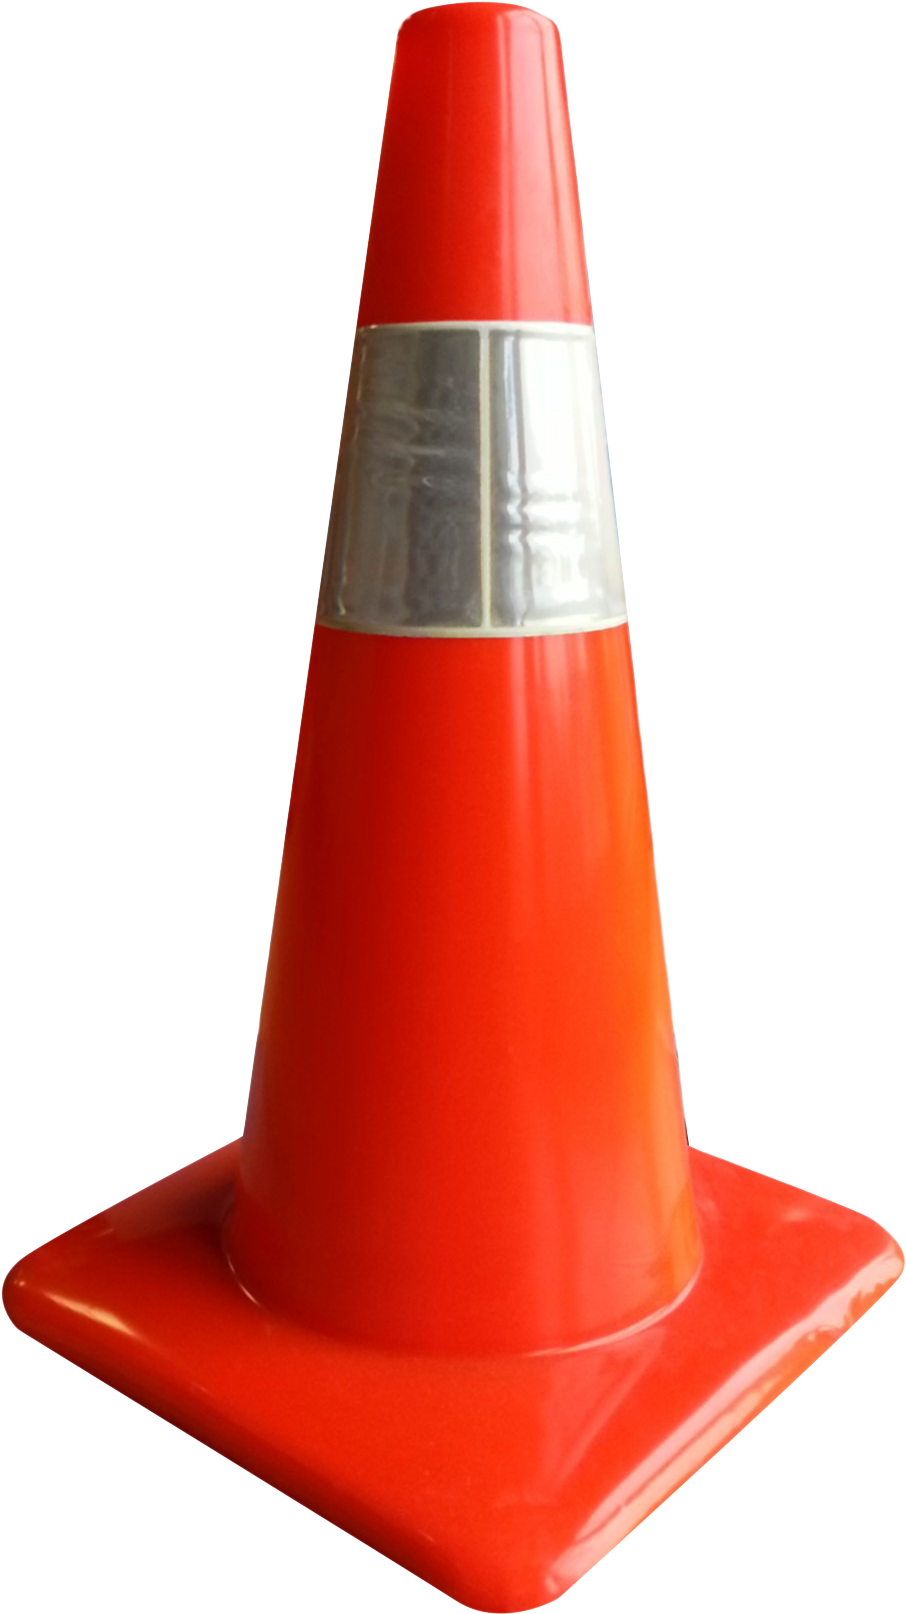 Related Wallpapers - Warning Cone (1701x1743)